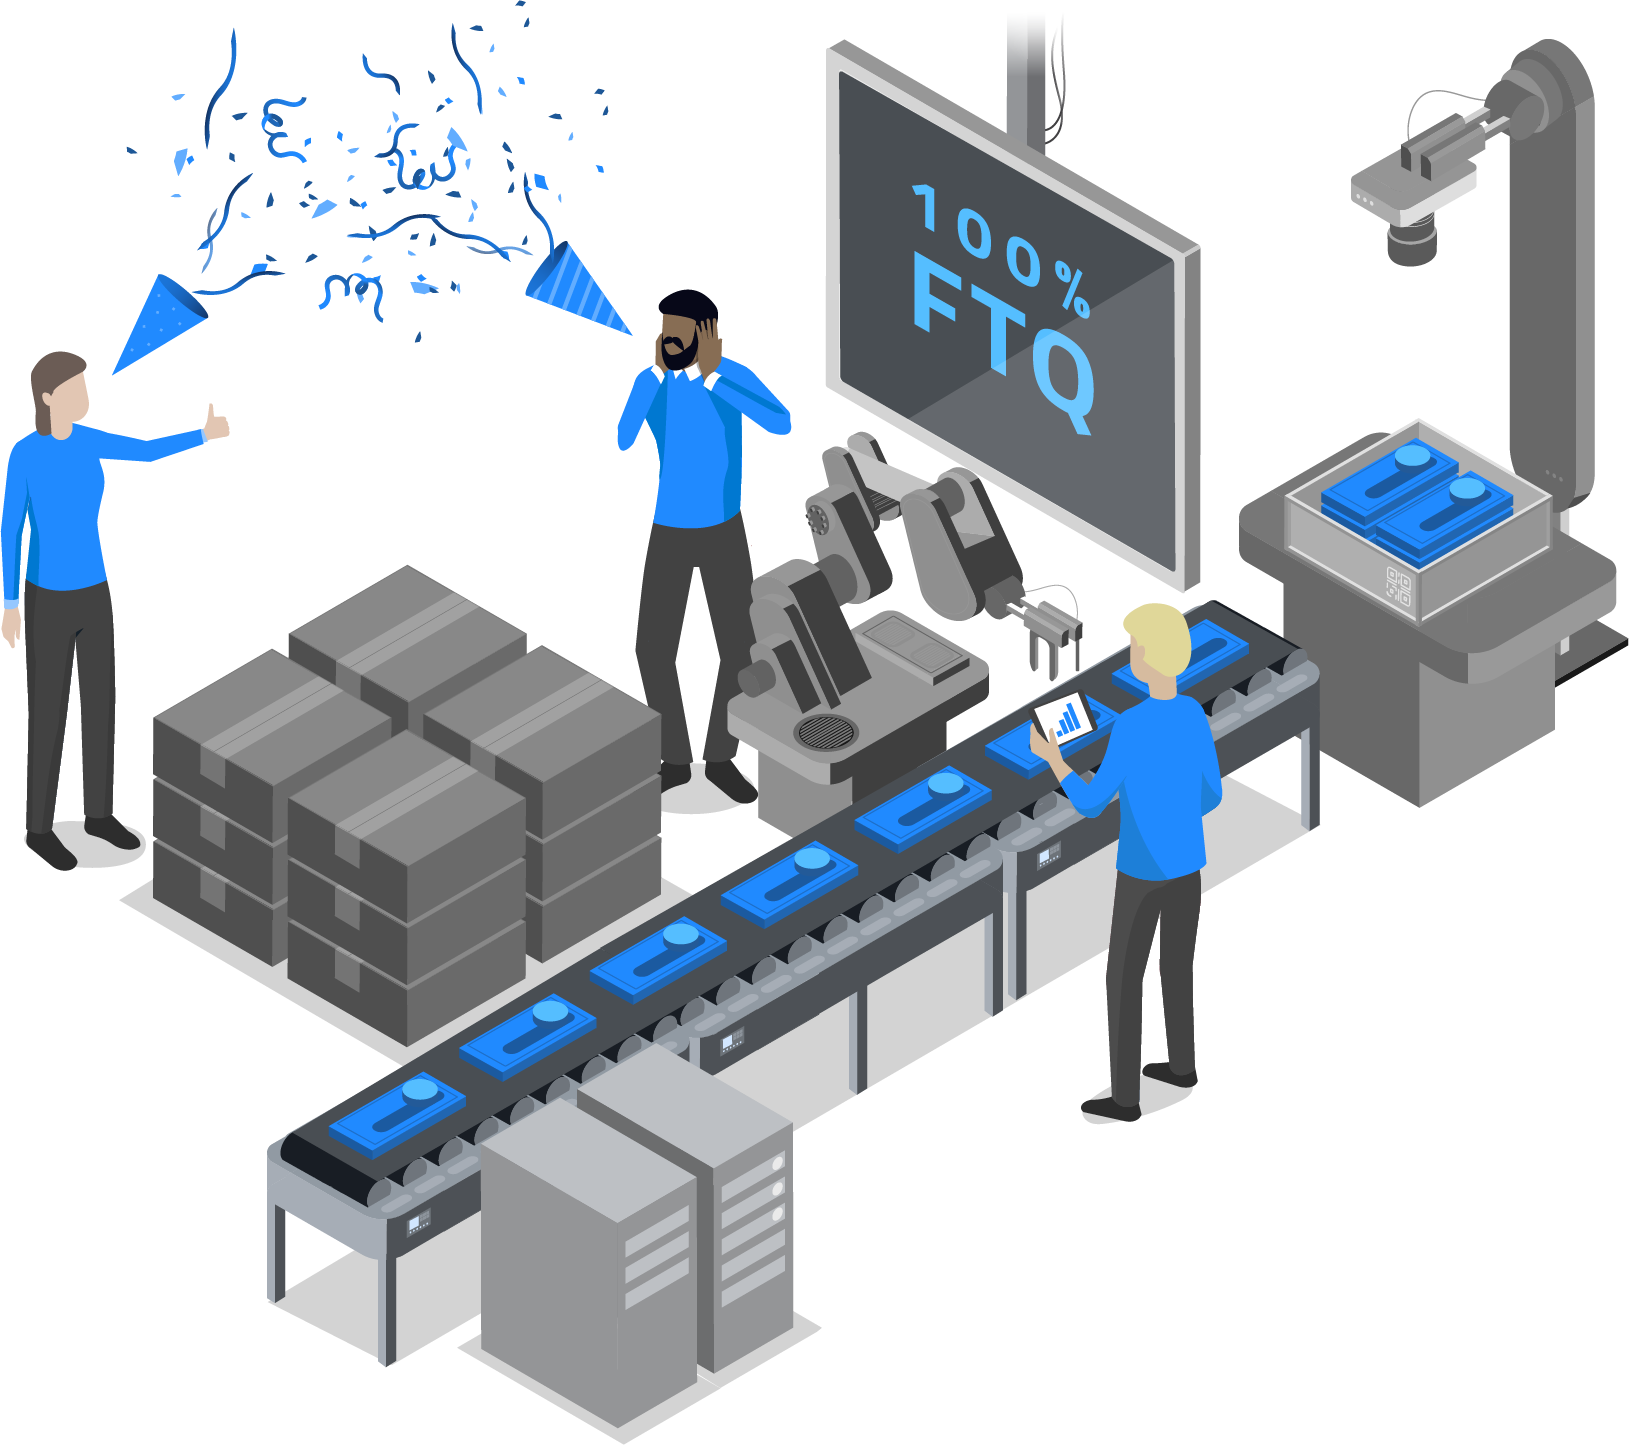 Use Epicor Connected Process Control to improve to 100% FTQ!